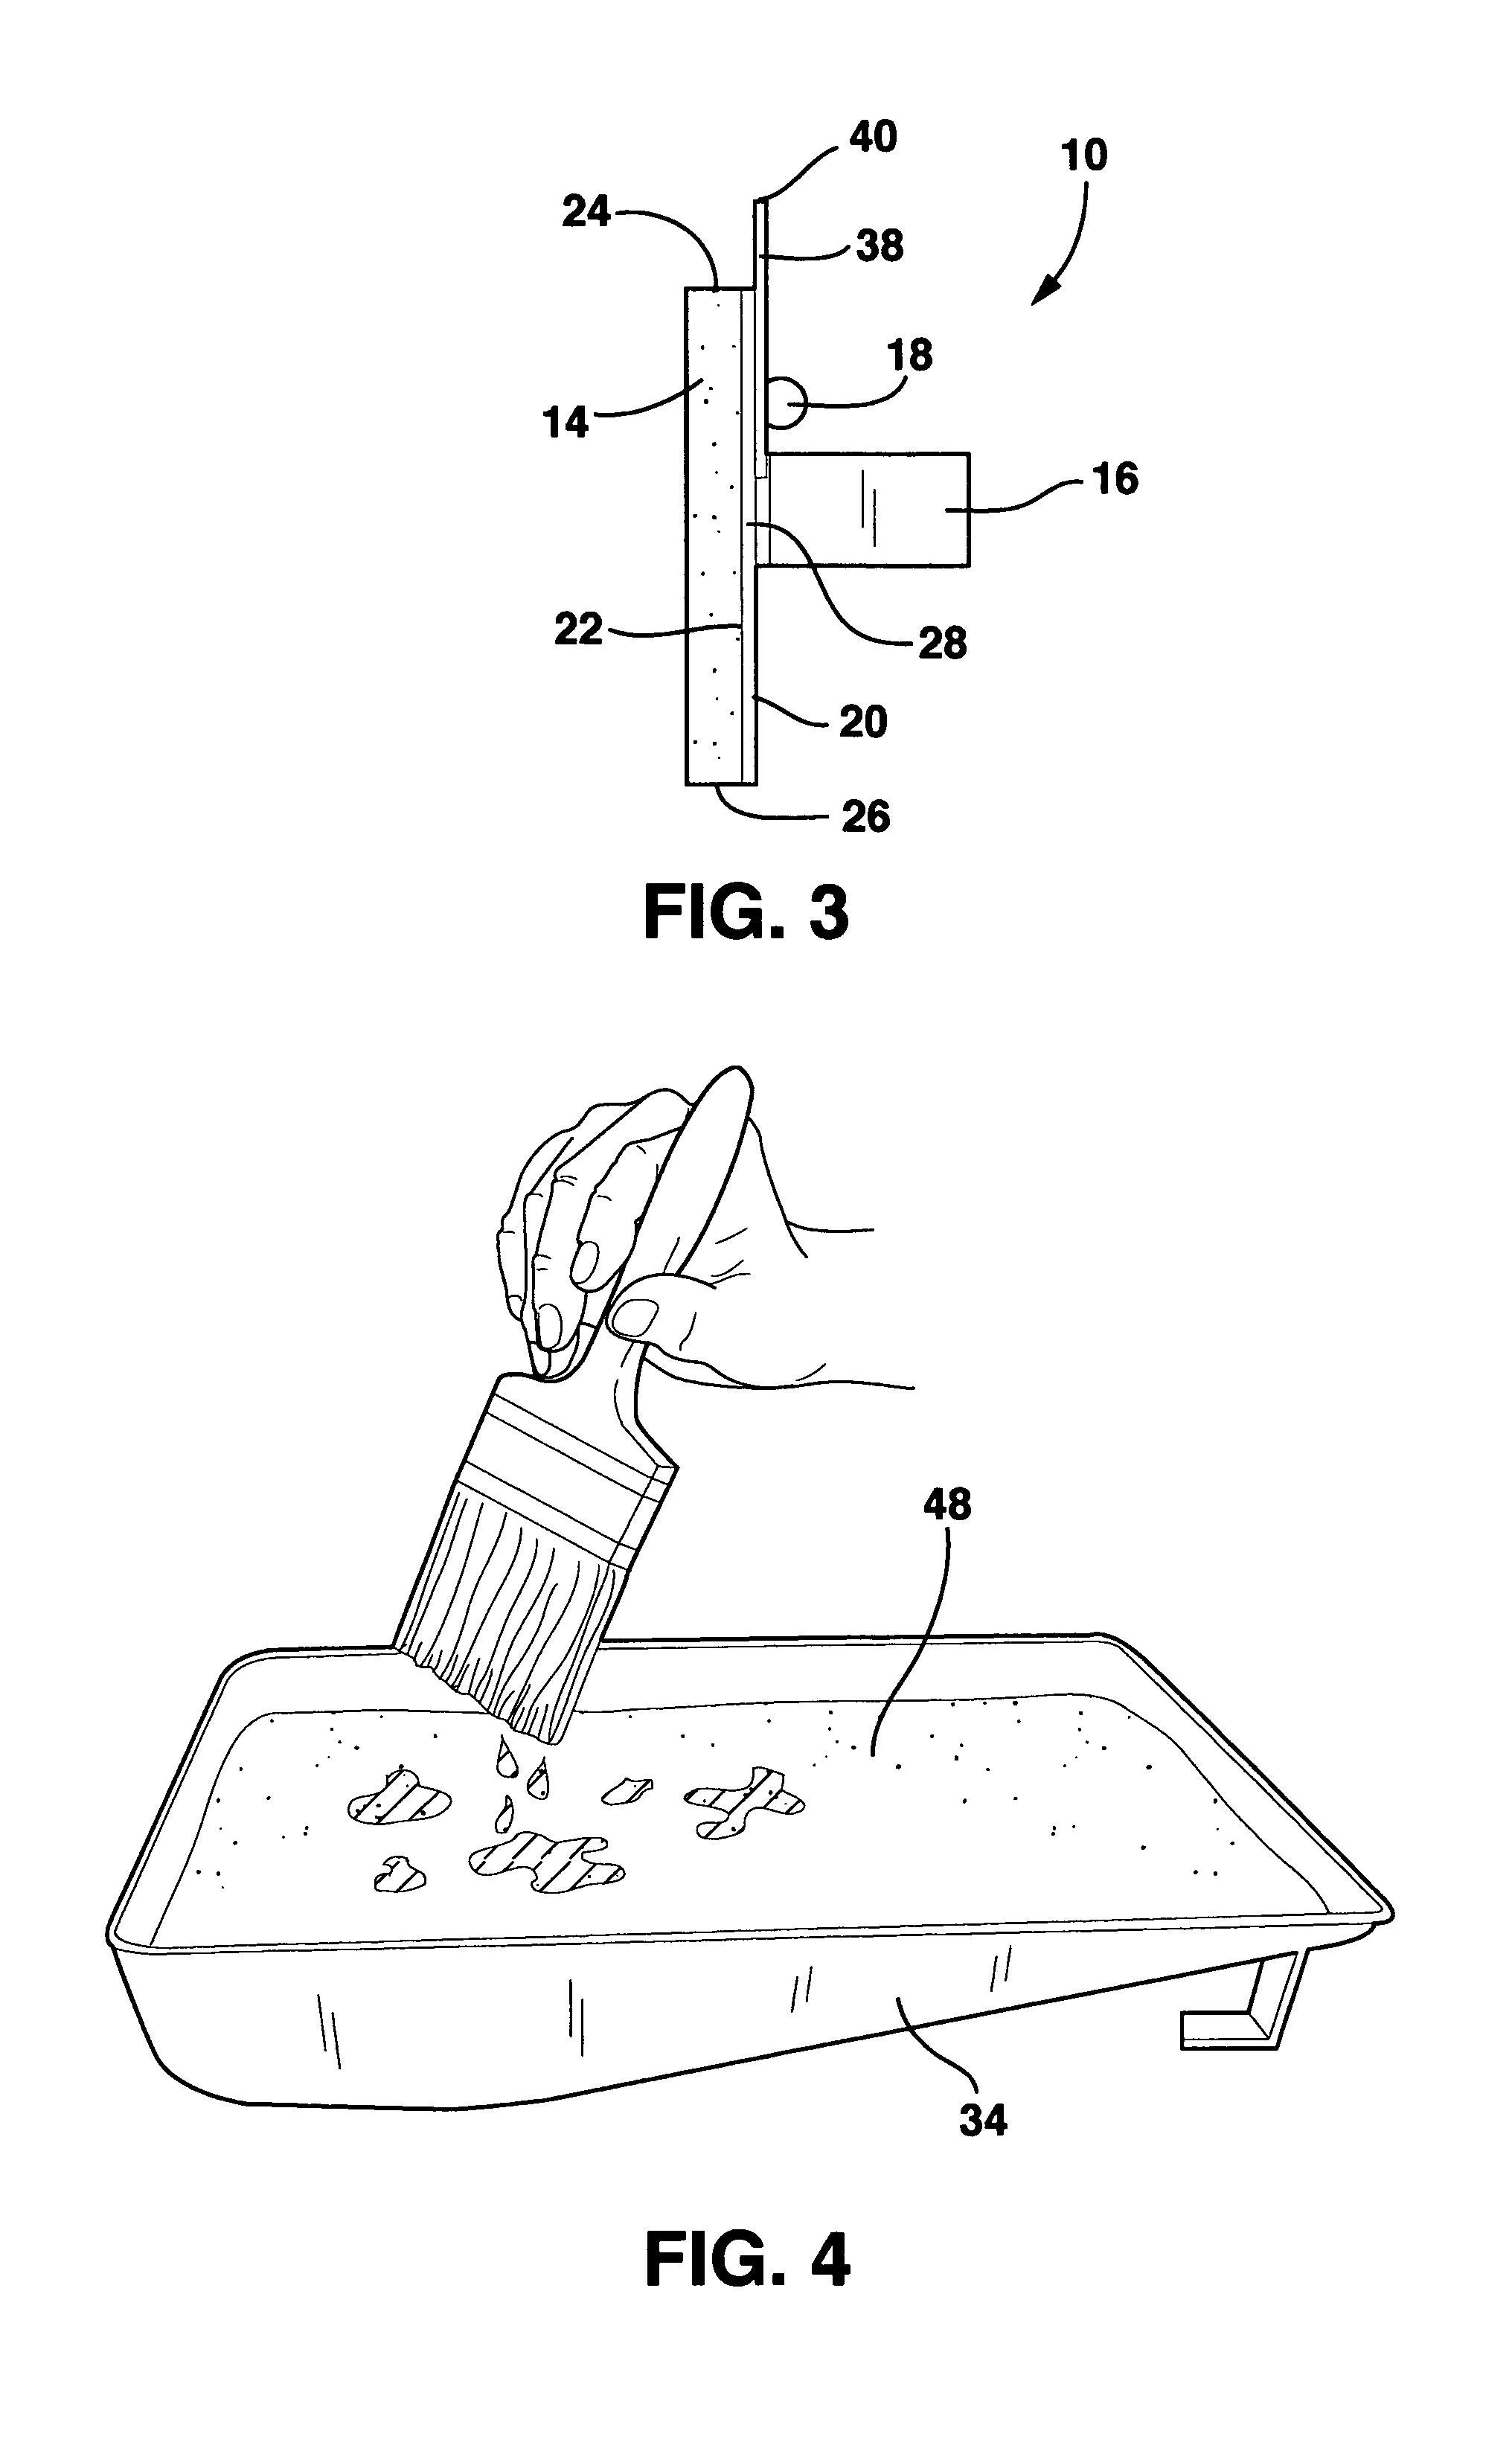 Painting device to produce decorative appearance